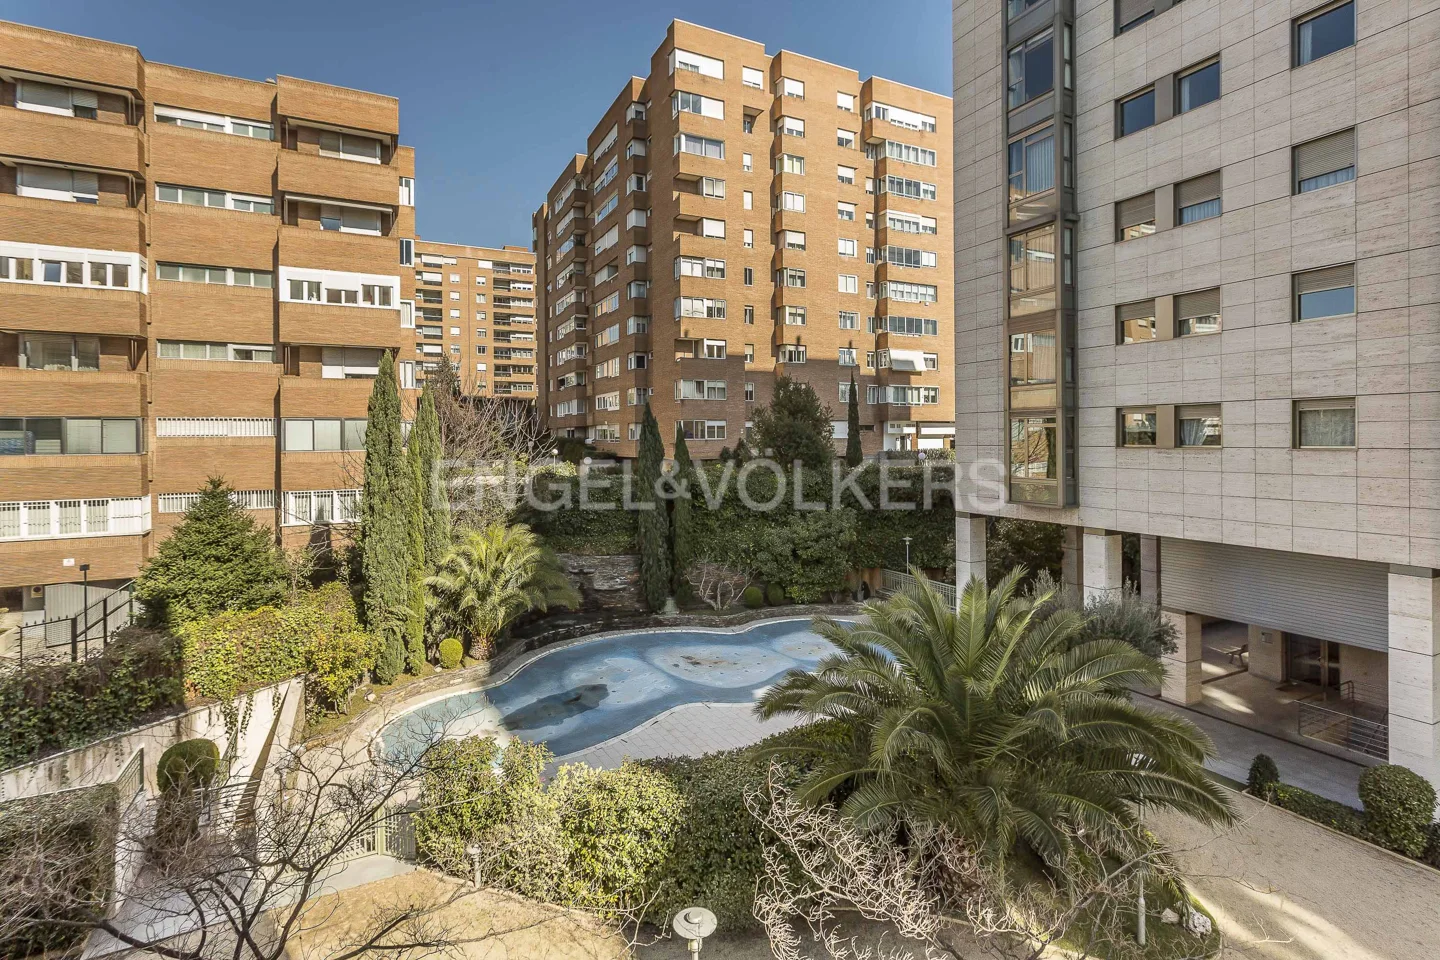 Spacious and bright apartment a few steps from the Retiro Park